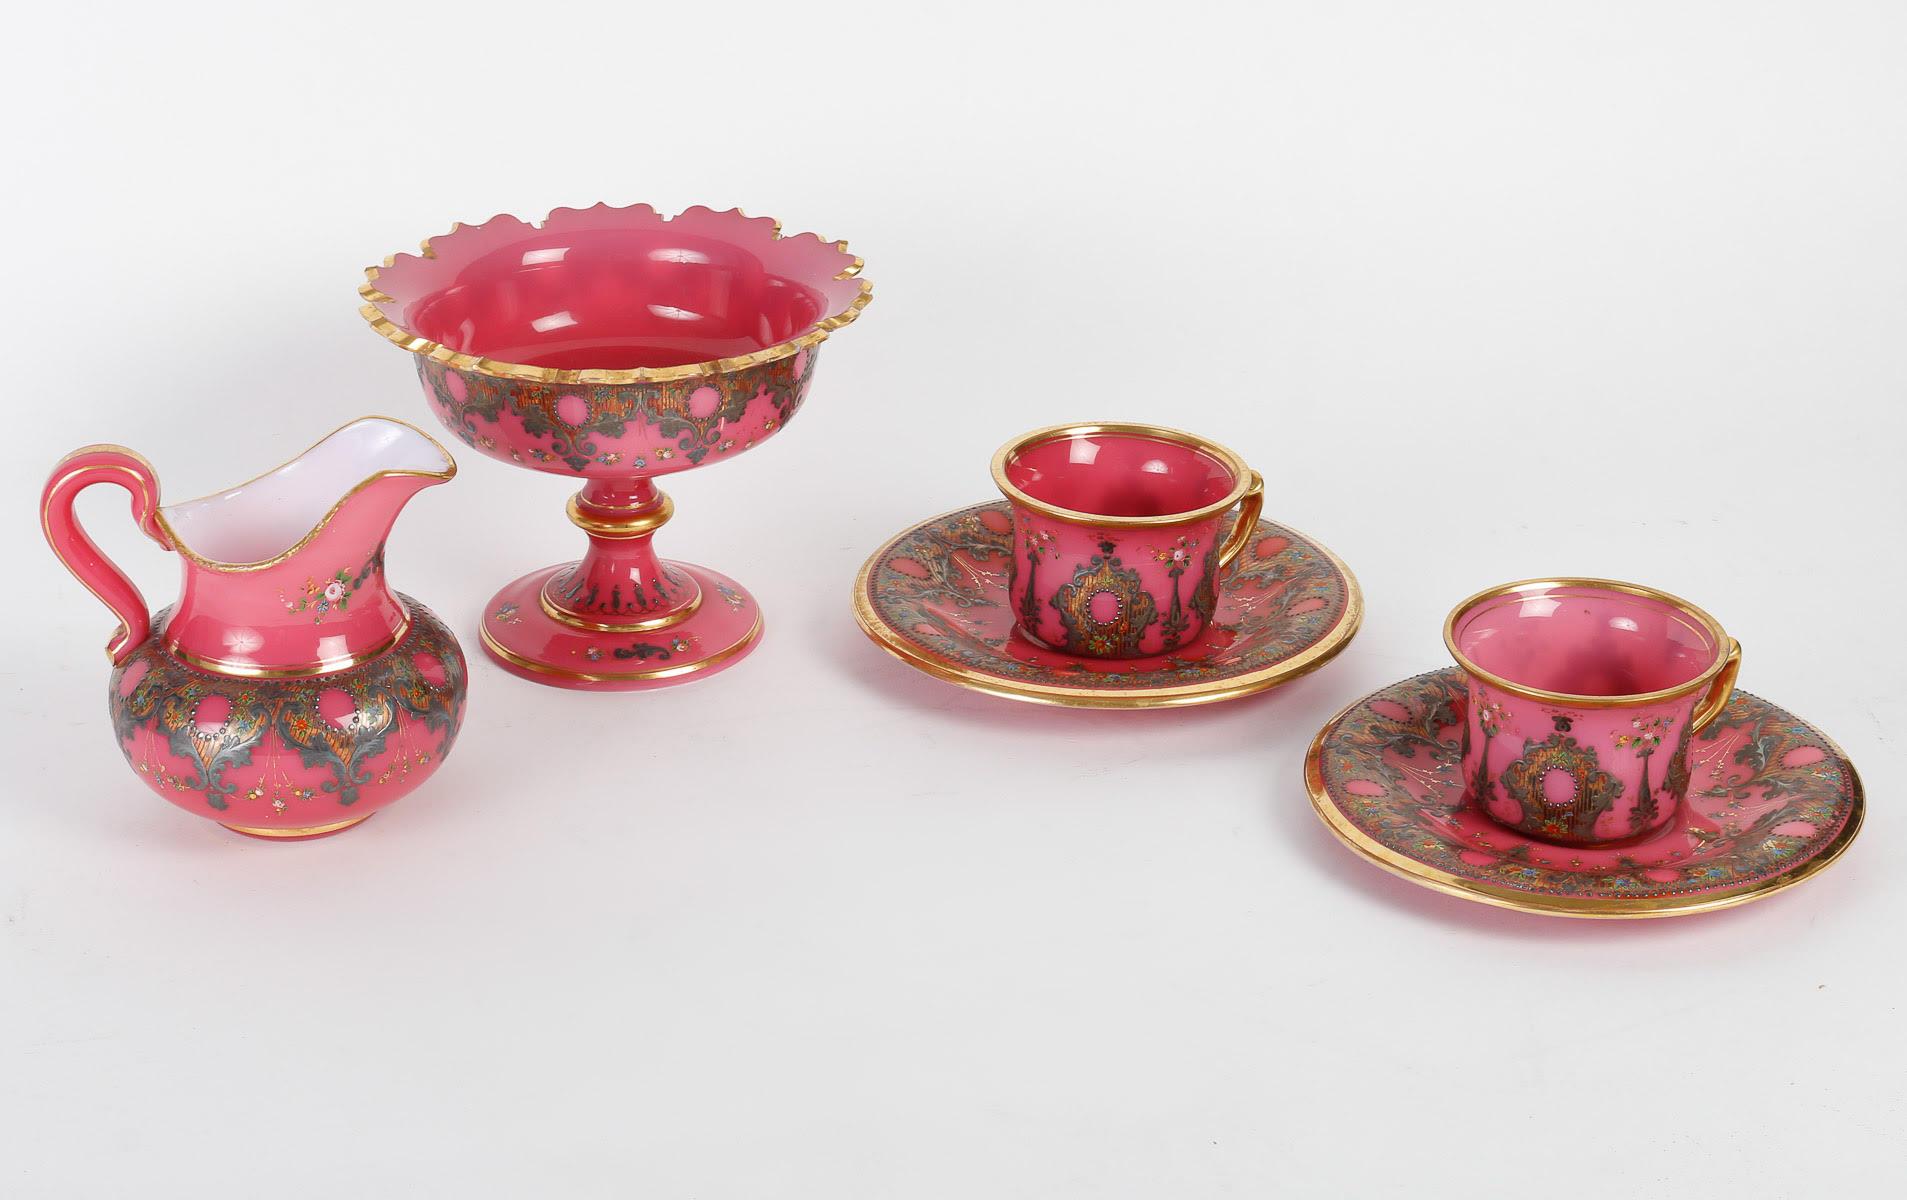 White and Pink Opaline Service Enamelled with Silver and Gold, 19th Century. 14